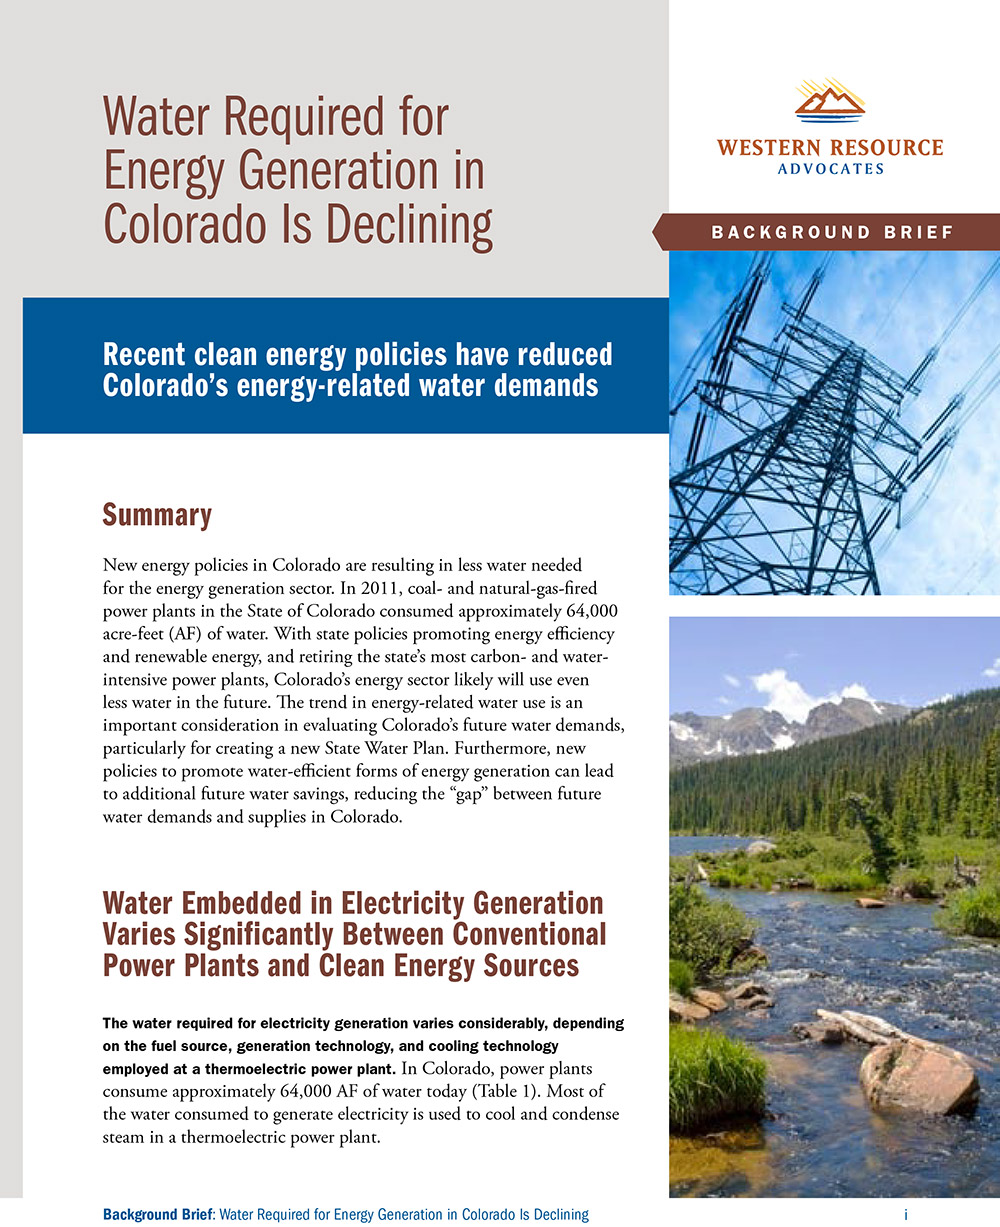 Water Required for Energy Generation in Colorado is Declining